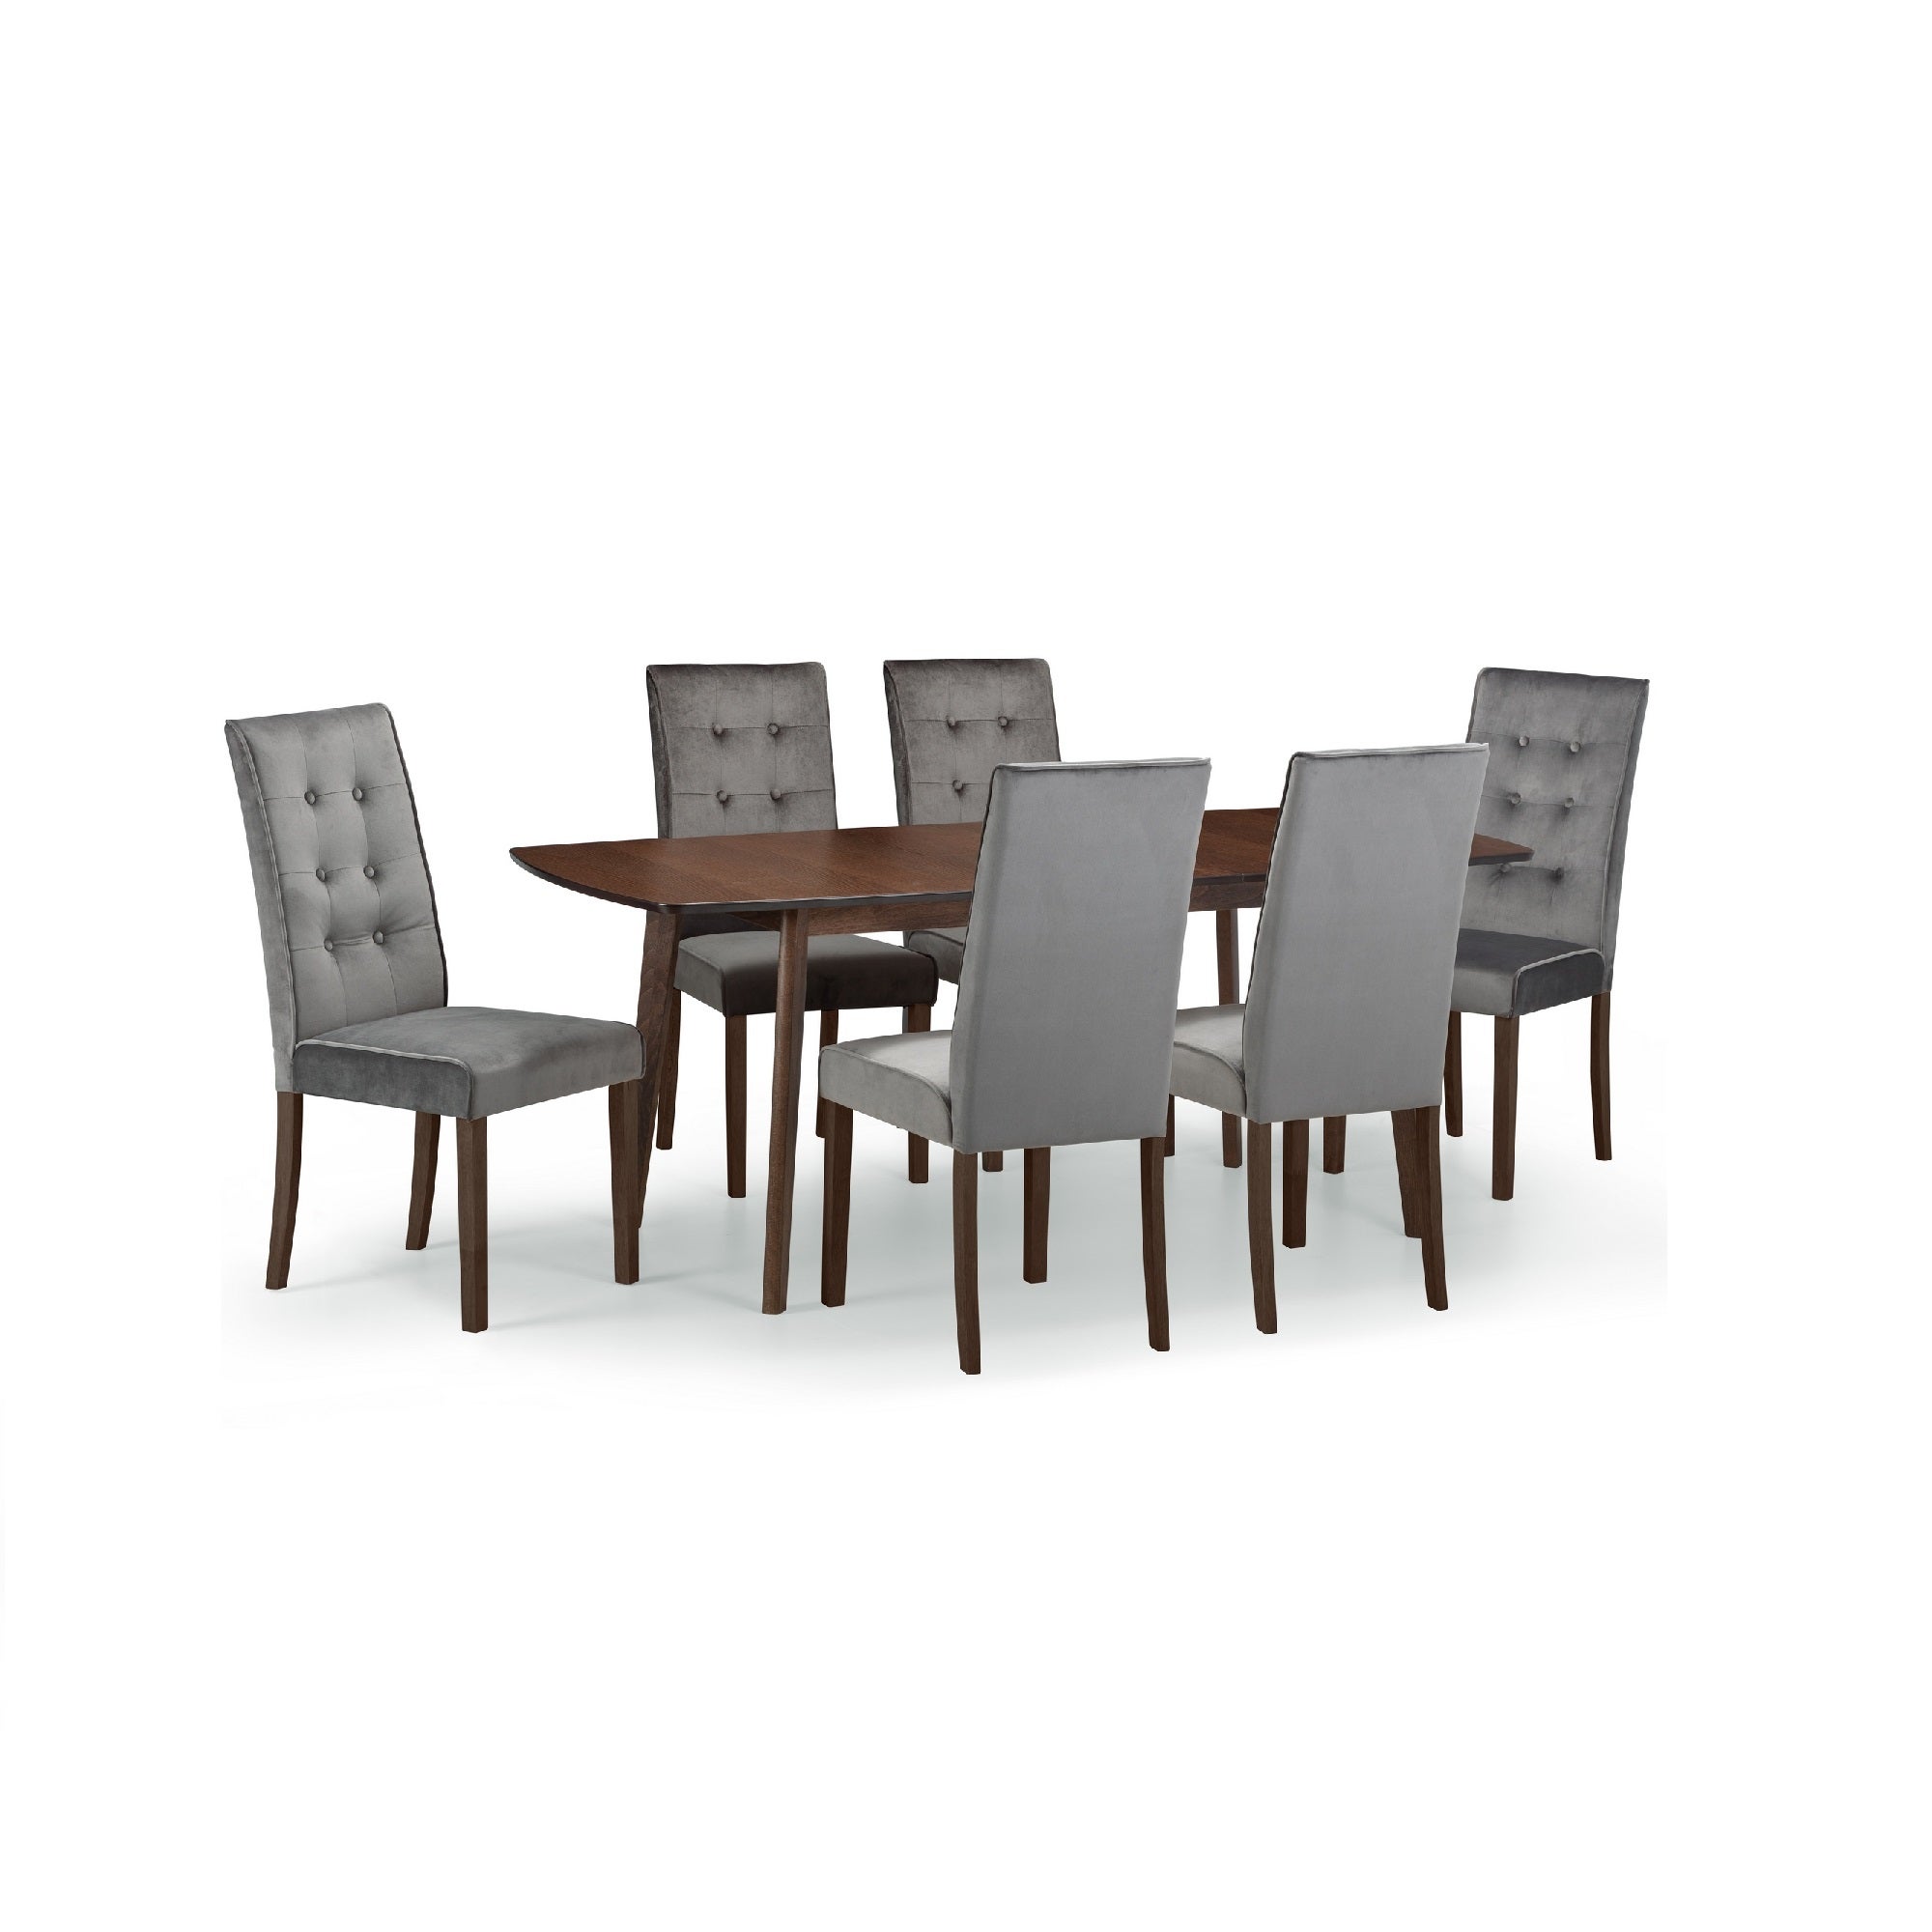 Kensington Rectangular Extendable Dining Table with 6 Madrid Chairs, Beech Wood Brown